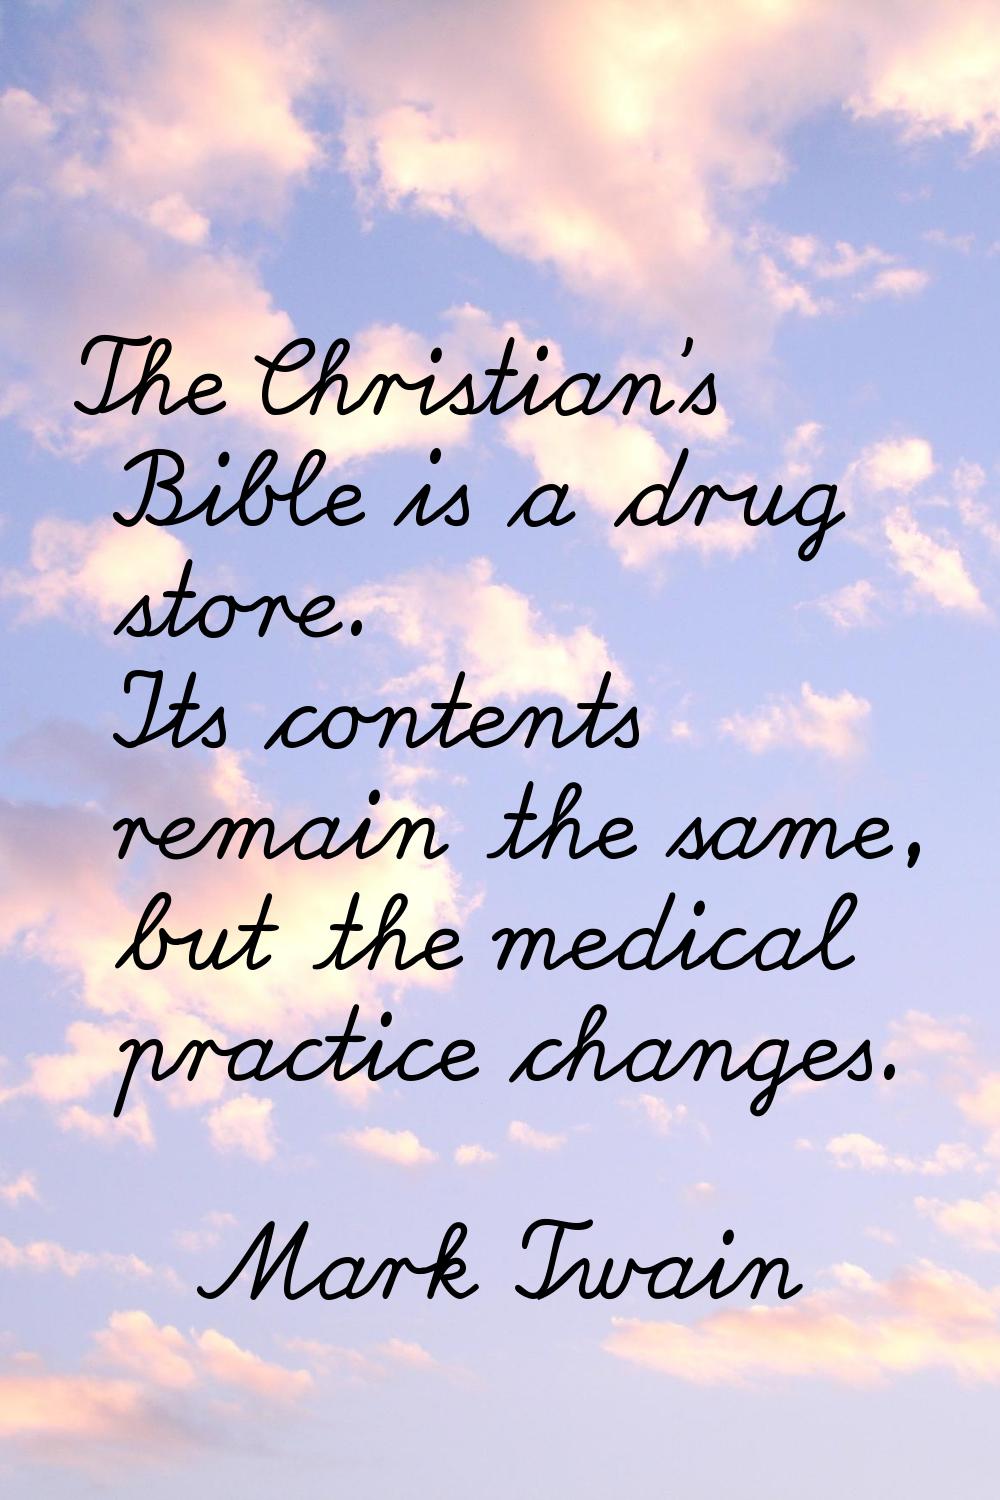 The Christian's Bible is a drug store. Its contents remain the same, but the medical practice chang